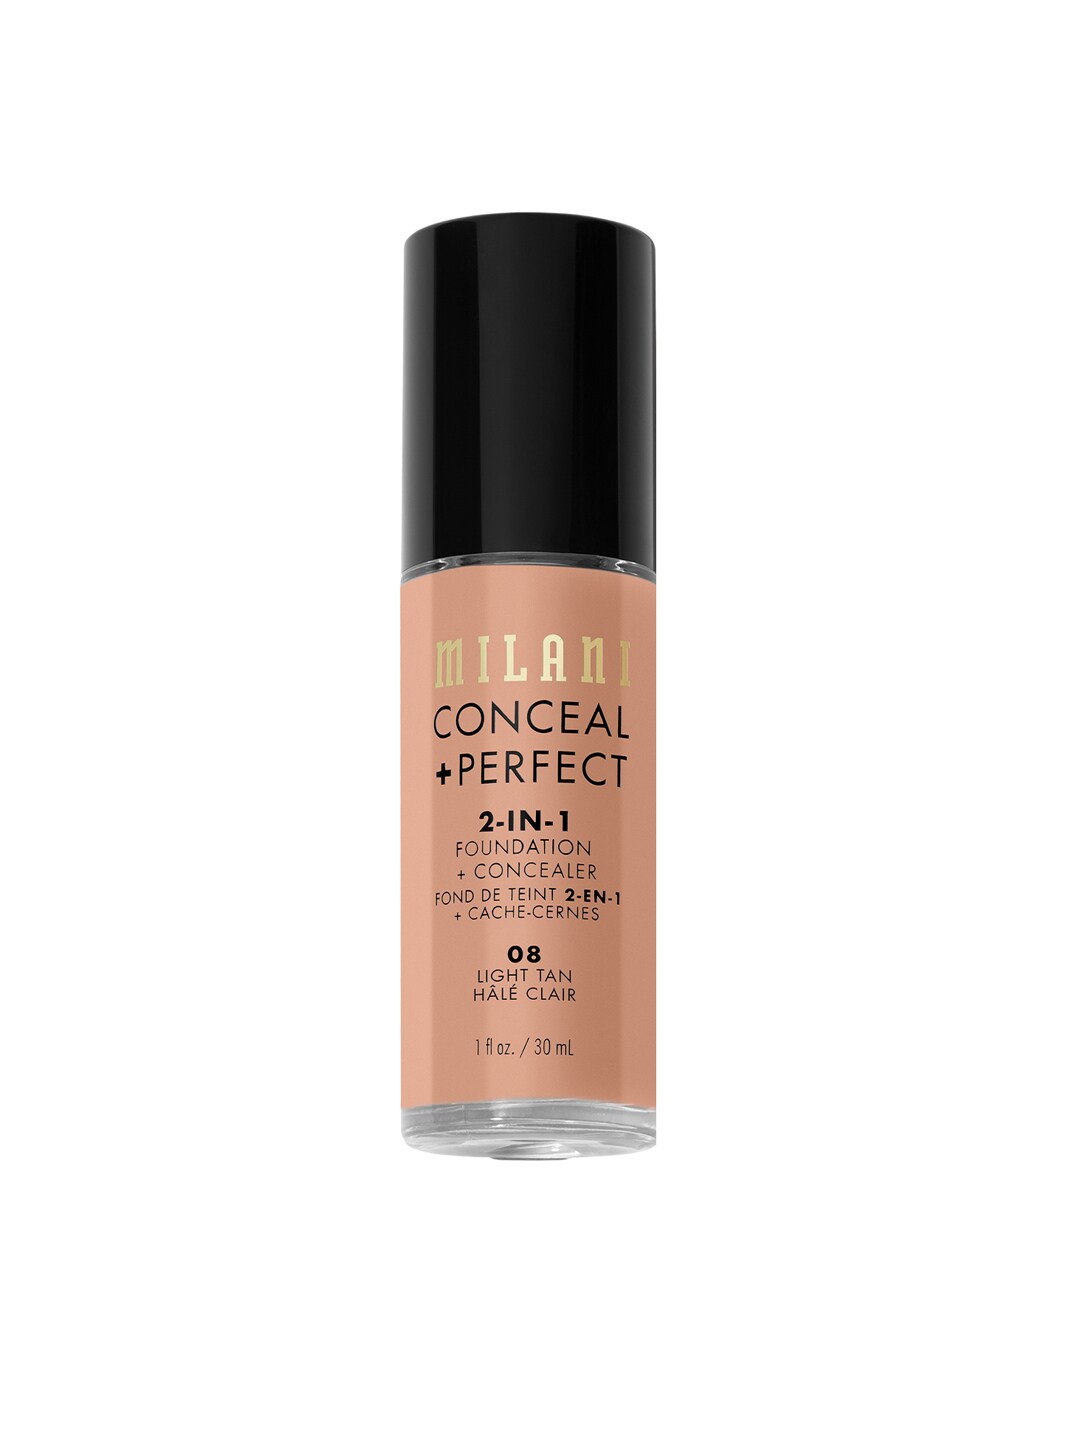 MILANI Conceal Perfect 2-in-1 Foundation & Concealer - Light Tan 08 Price in India